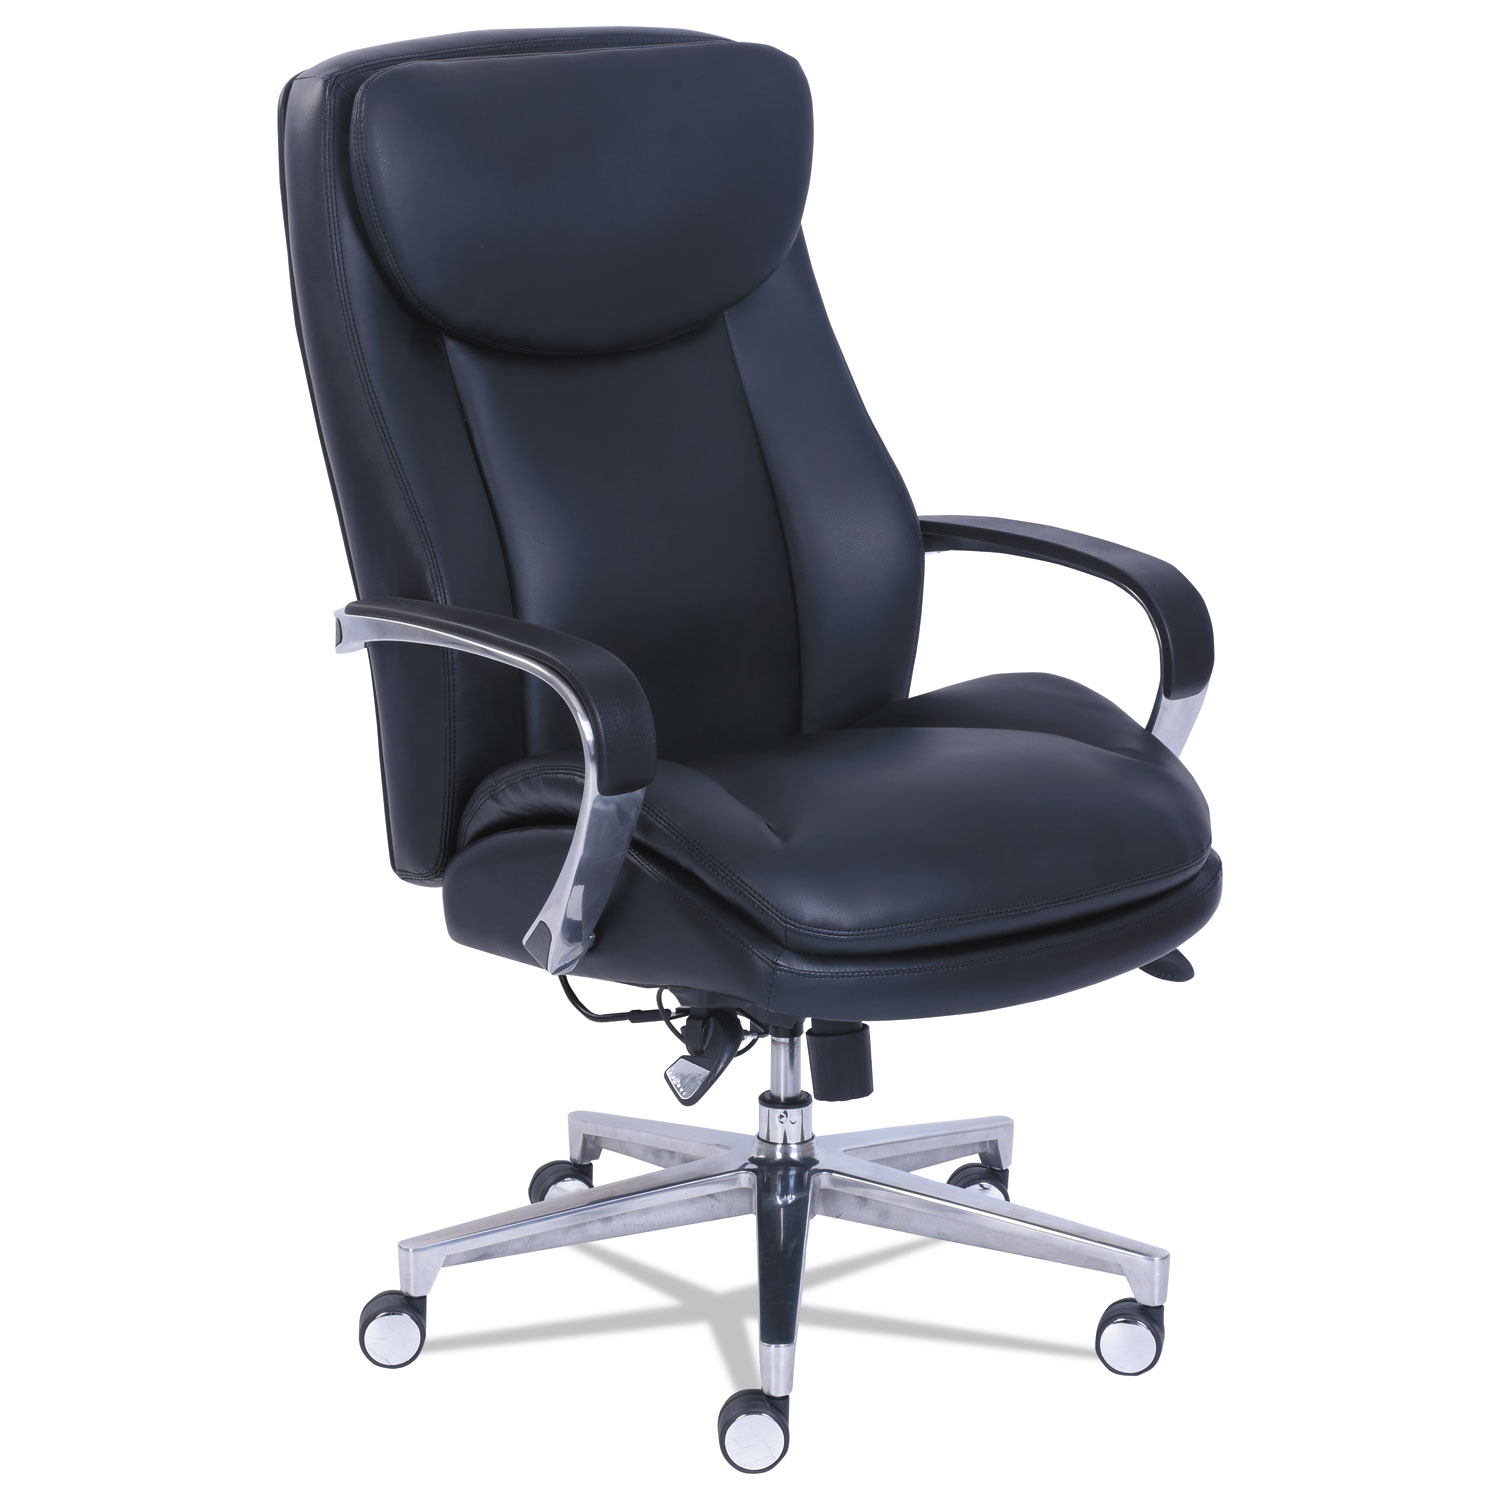  La-Z-Boy 48957 Commercial 2000 High-Back Executive Chair with Dynamic Lumbar Support, Supports up to 300 lbs., Black Seat/Back, Silver Base (LZB48957) 